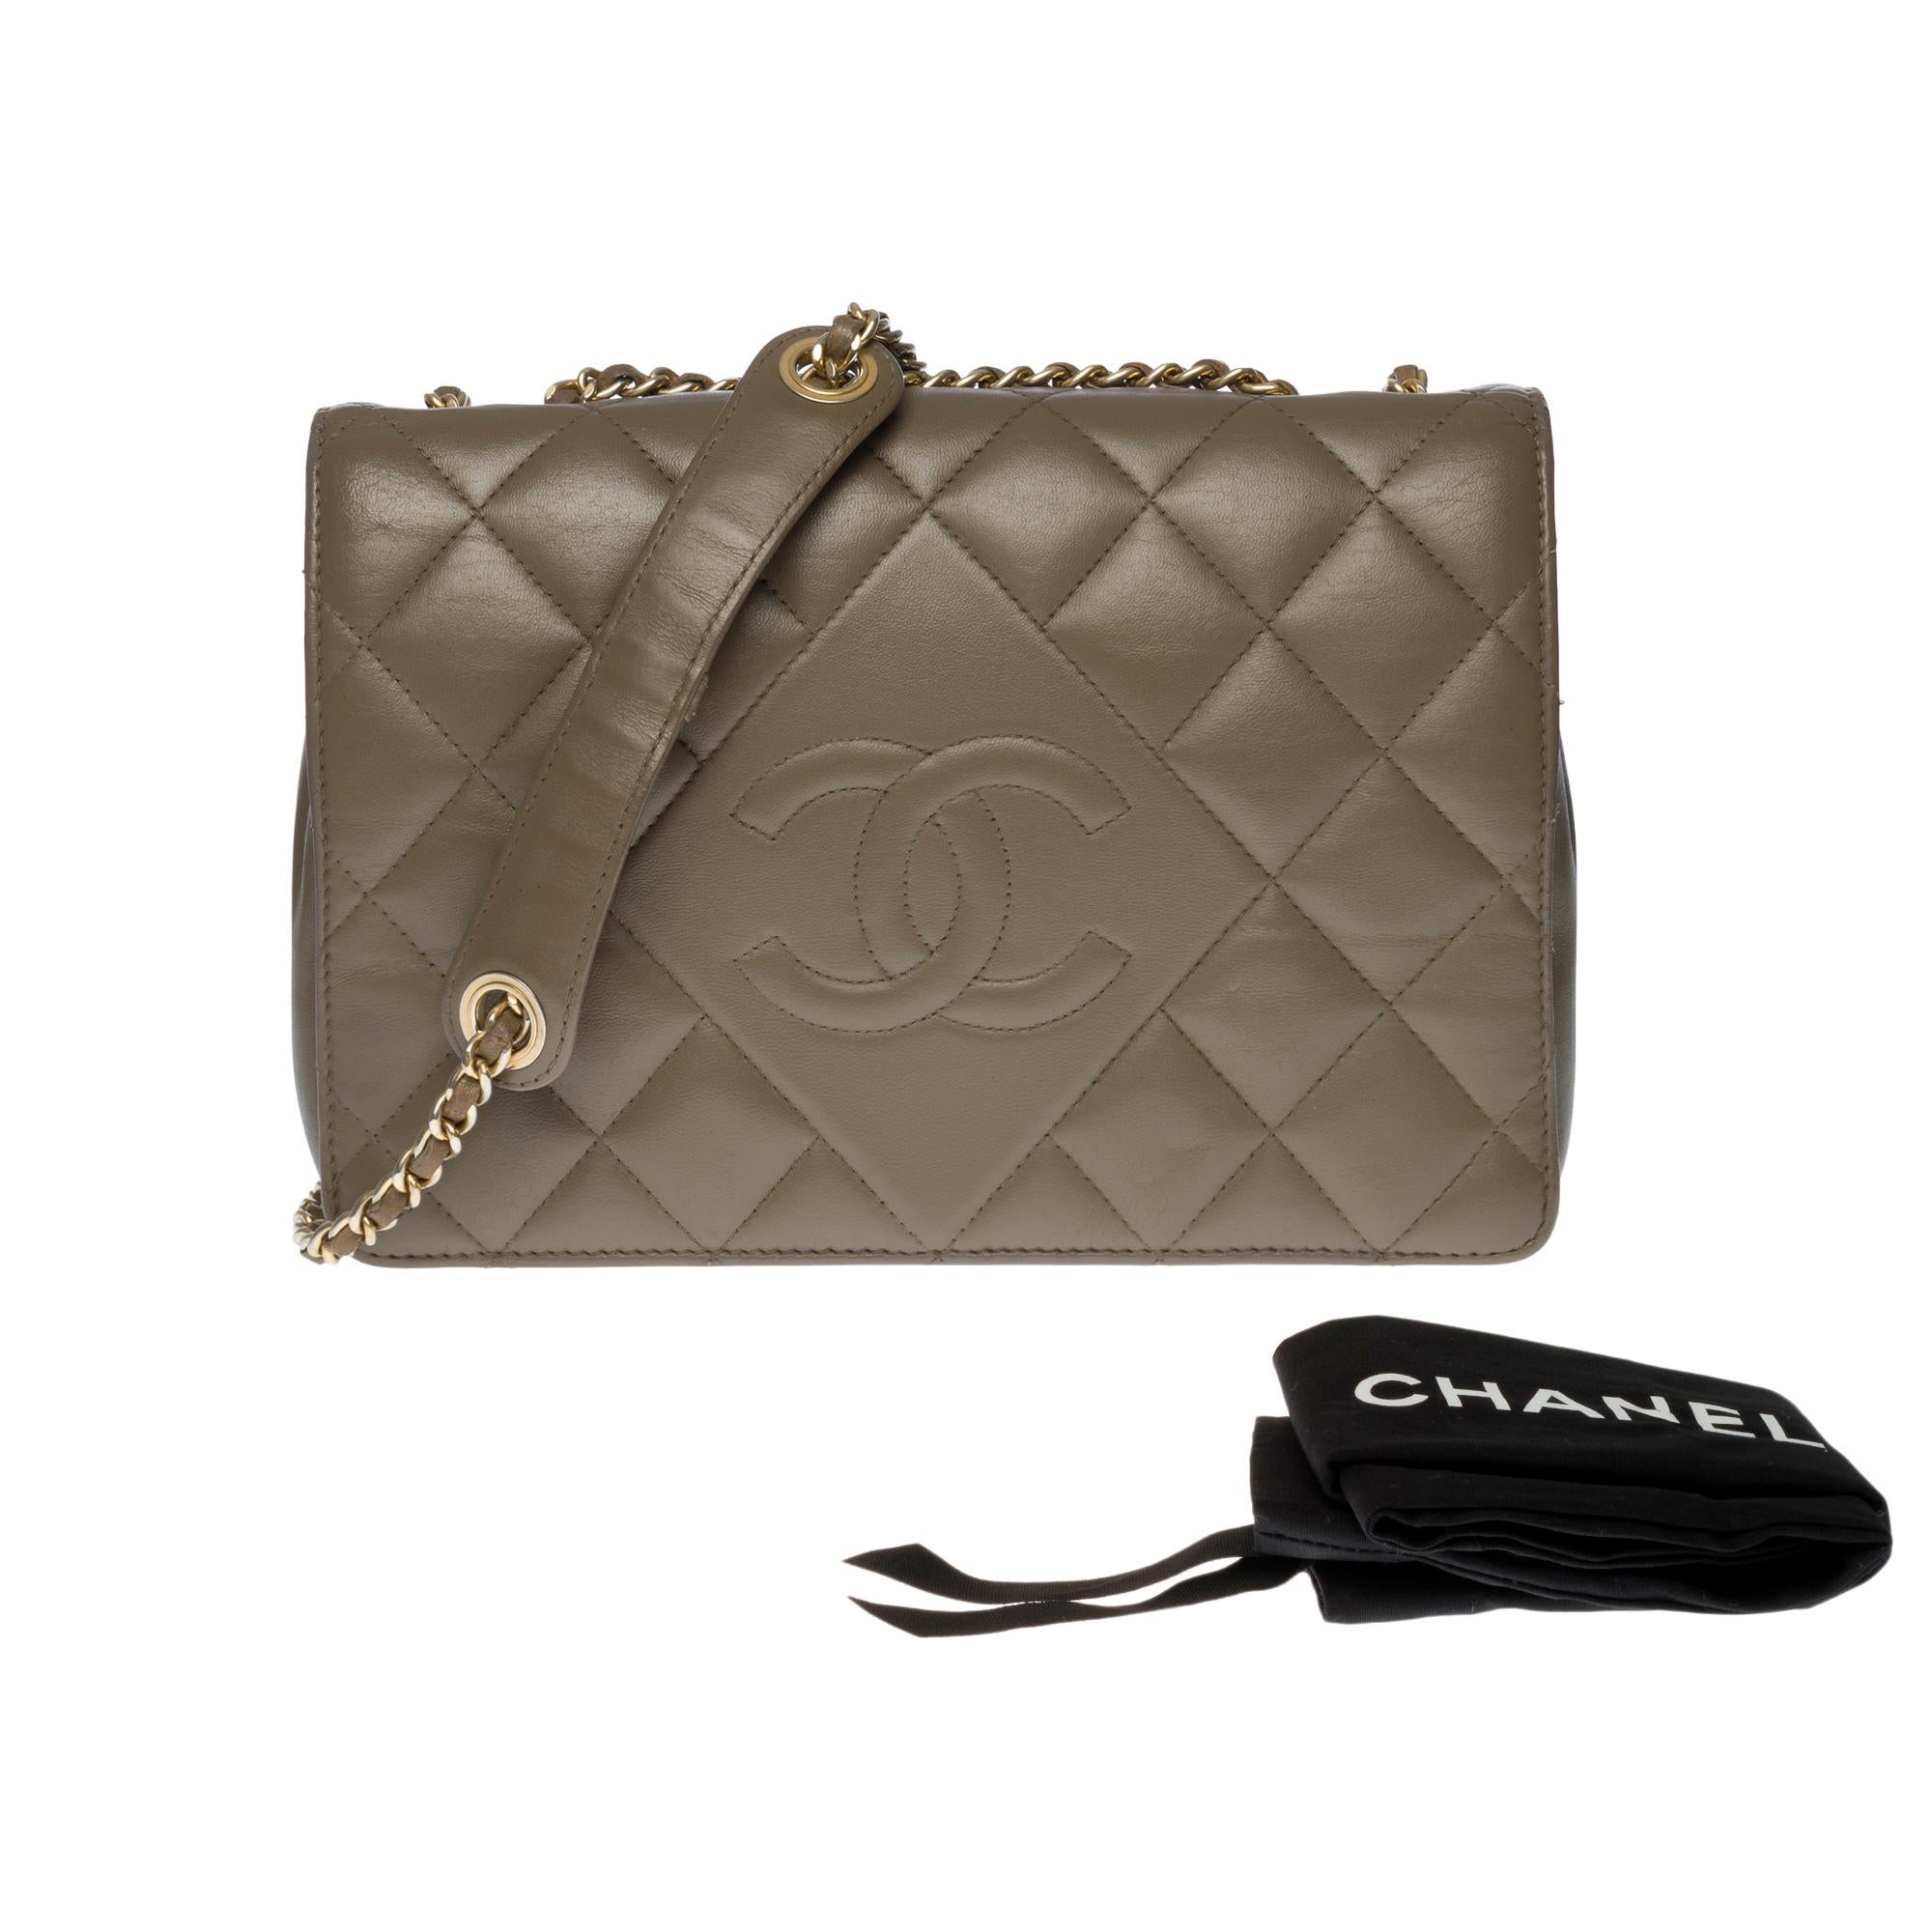 Amazing Chanel Classic Full Flap shoulder bag in Taupe quilted leather, SHW 4